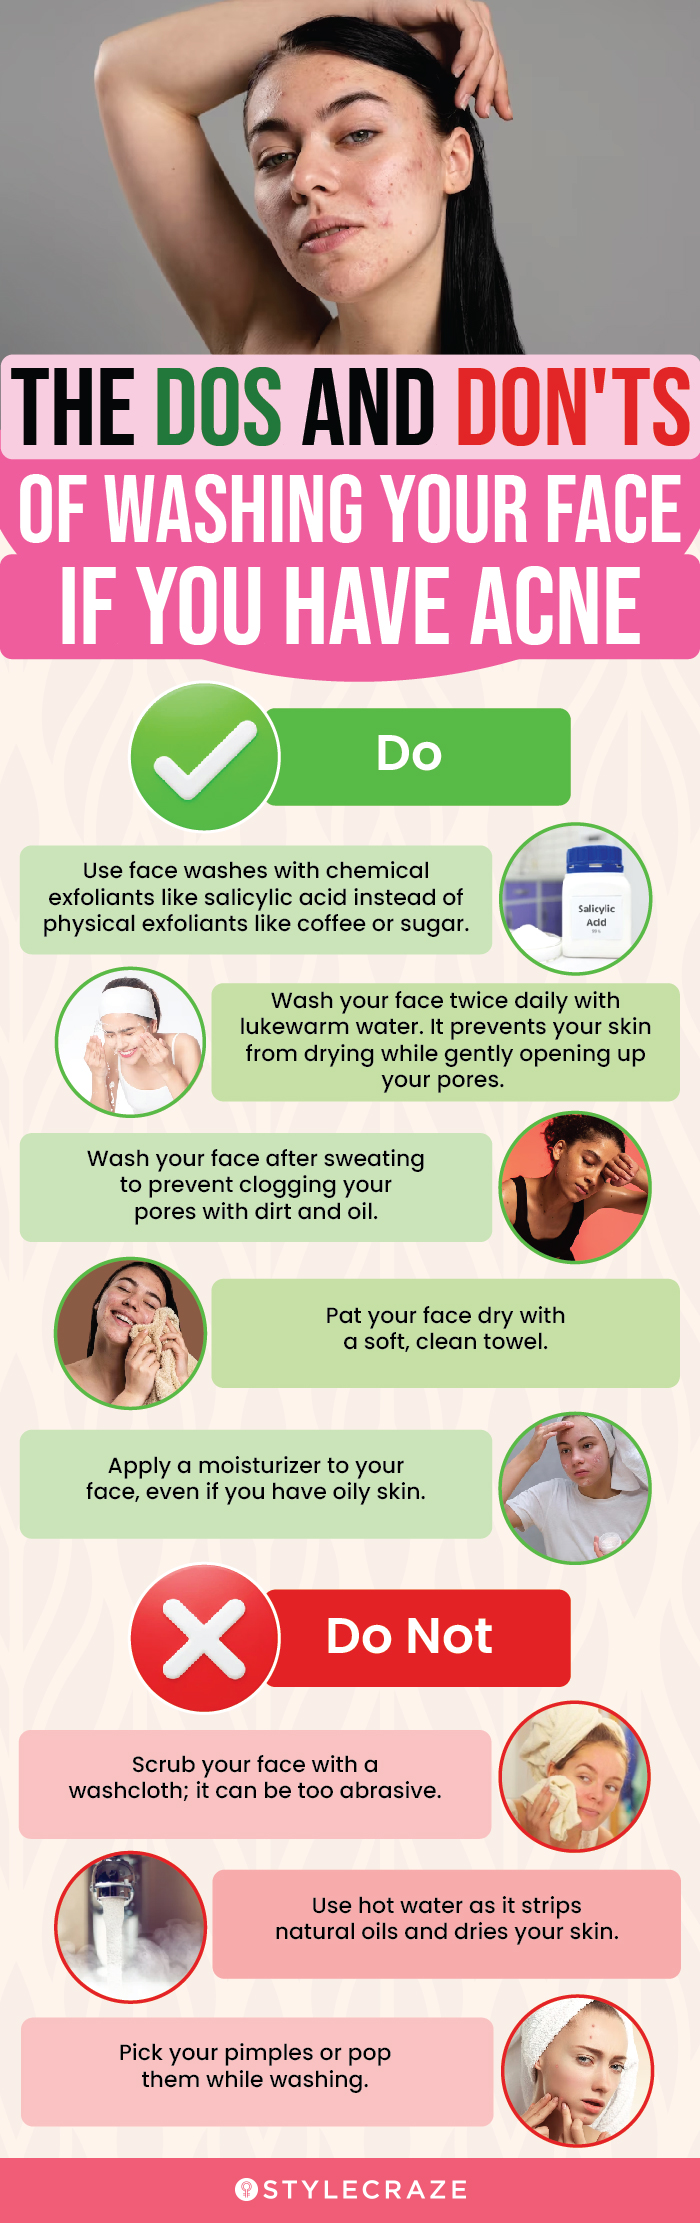 The Dos And Don'ts Of Washing Your Face If You Have Acne (infographic)